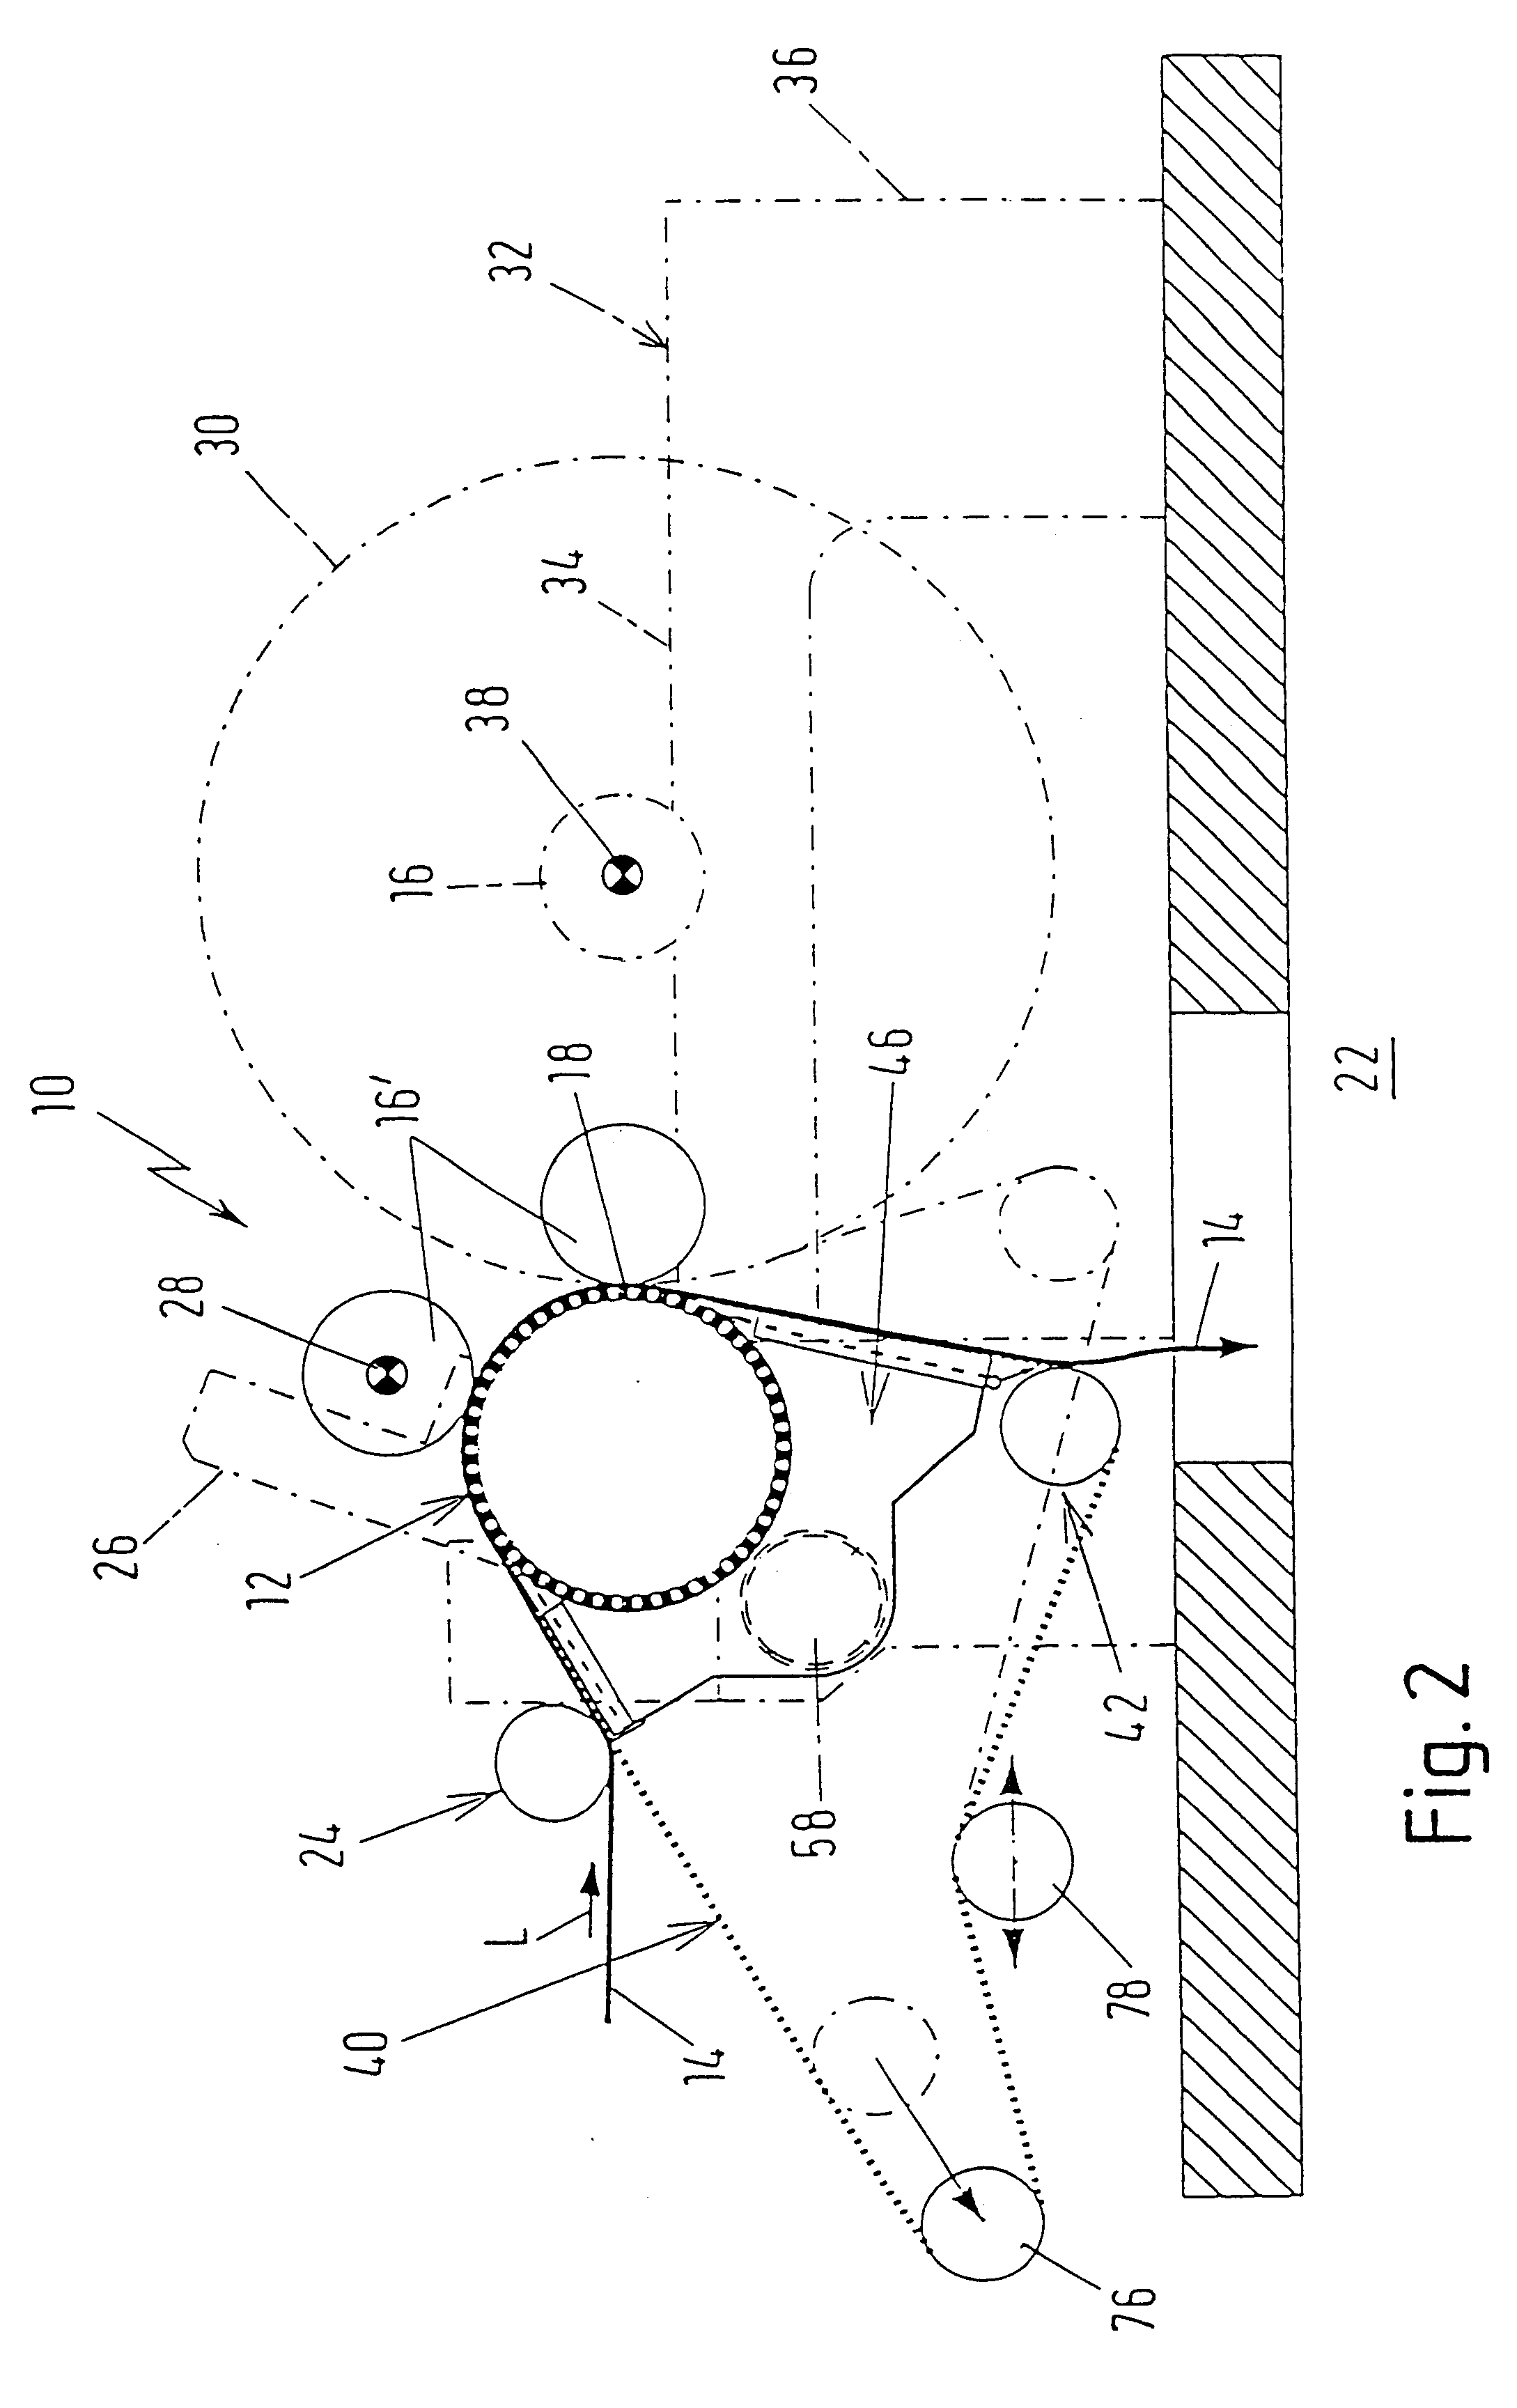 Winding device and method for winding web material